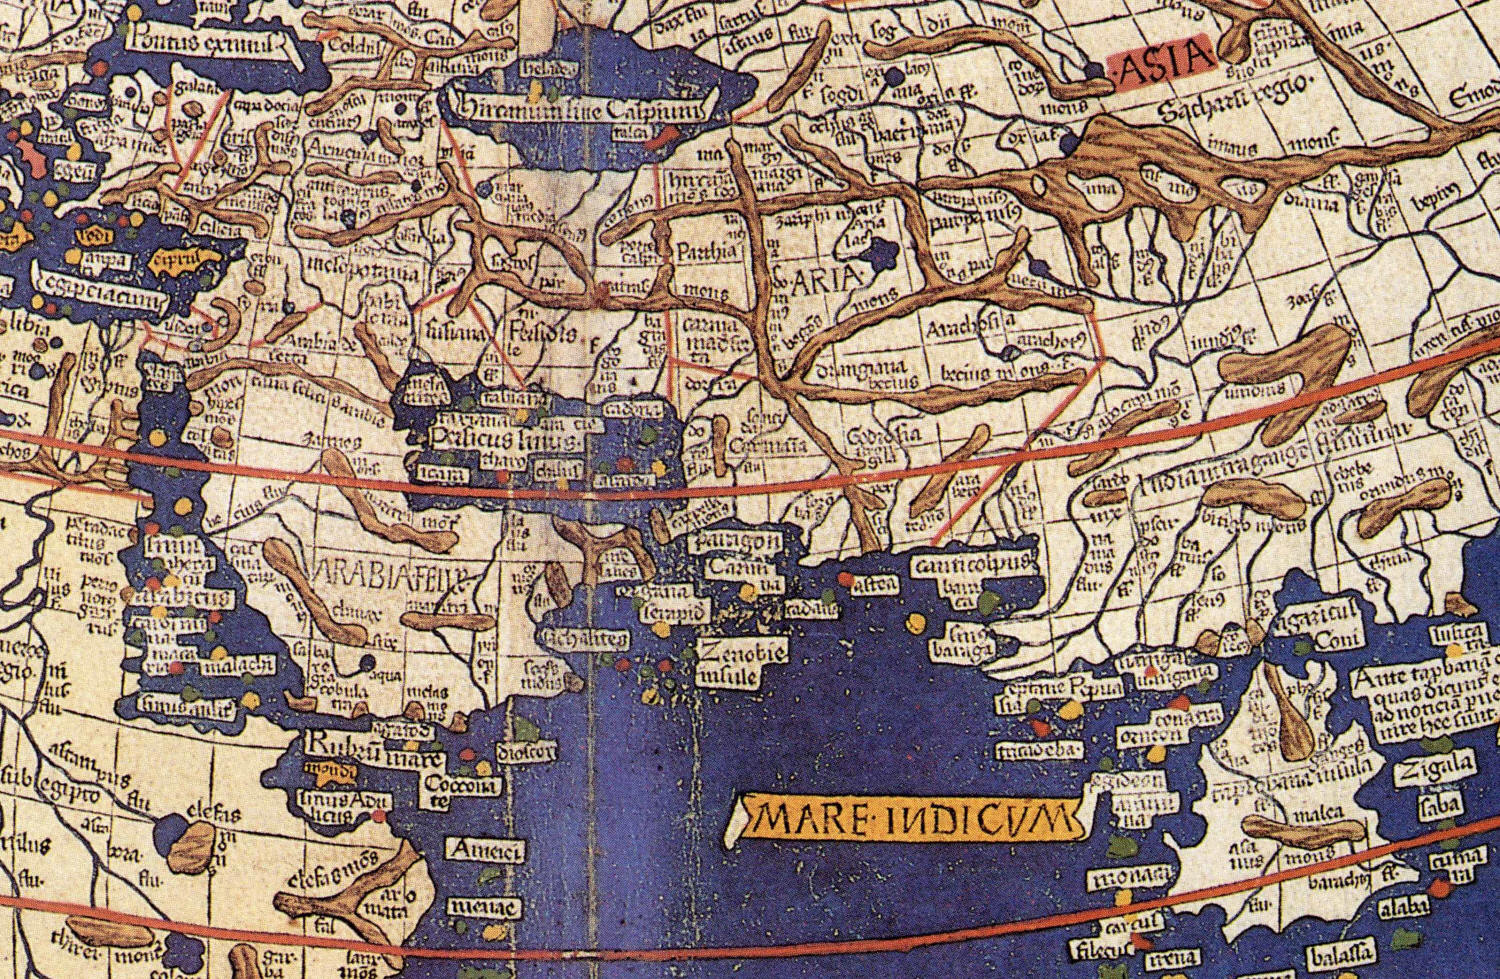 Asia section from the reproduction woodcut of Ptolemy's (90-168 CE) map of the world by Johane Schnitzer (Ulm: Leinhart Holle, 1482). The original map was lost.